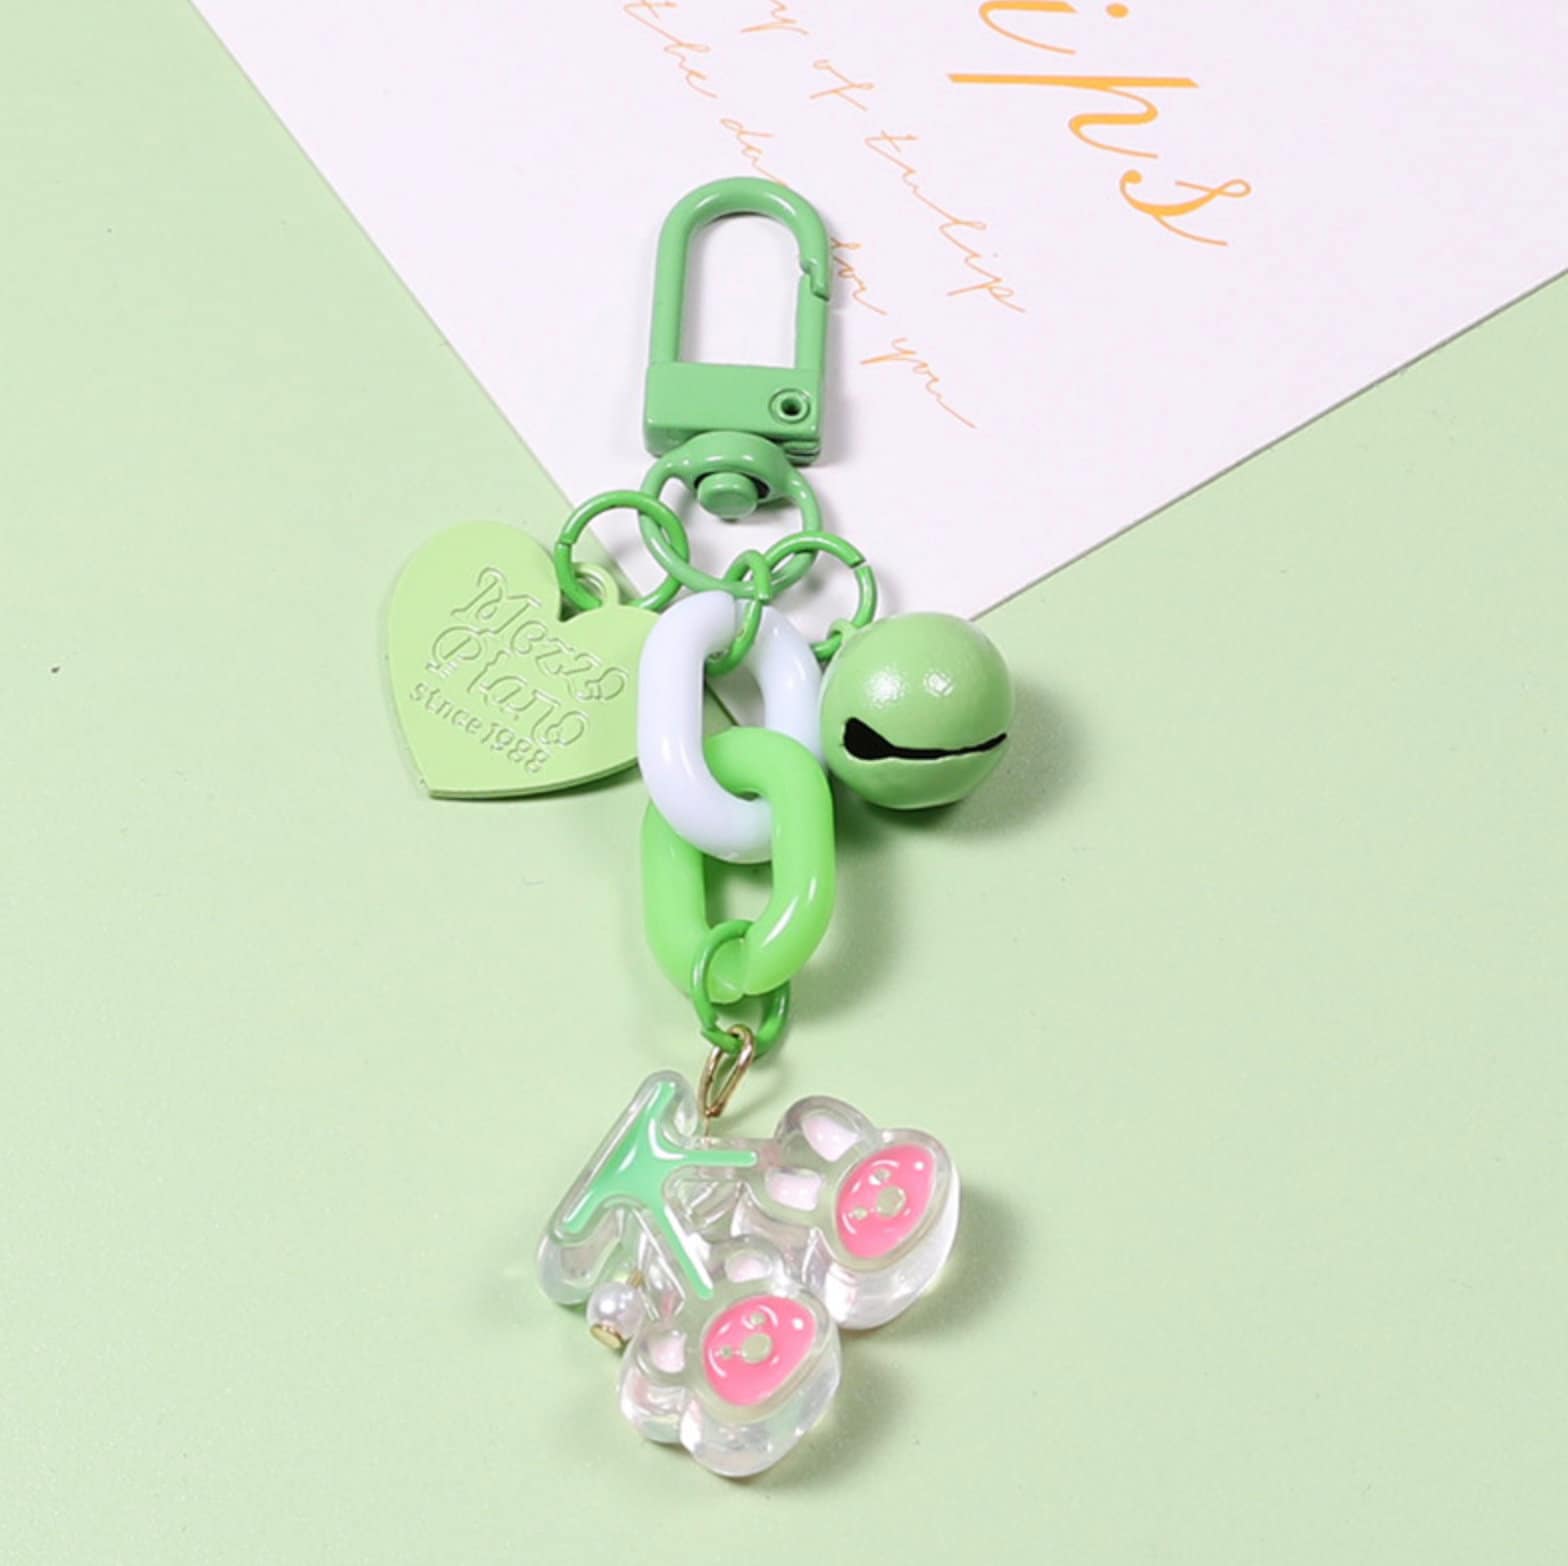 Cute Acrylic Bead and Chain Link, Animal and Flower Themed Keychain, Key ring